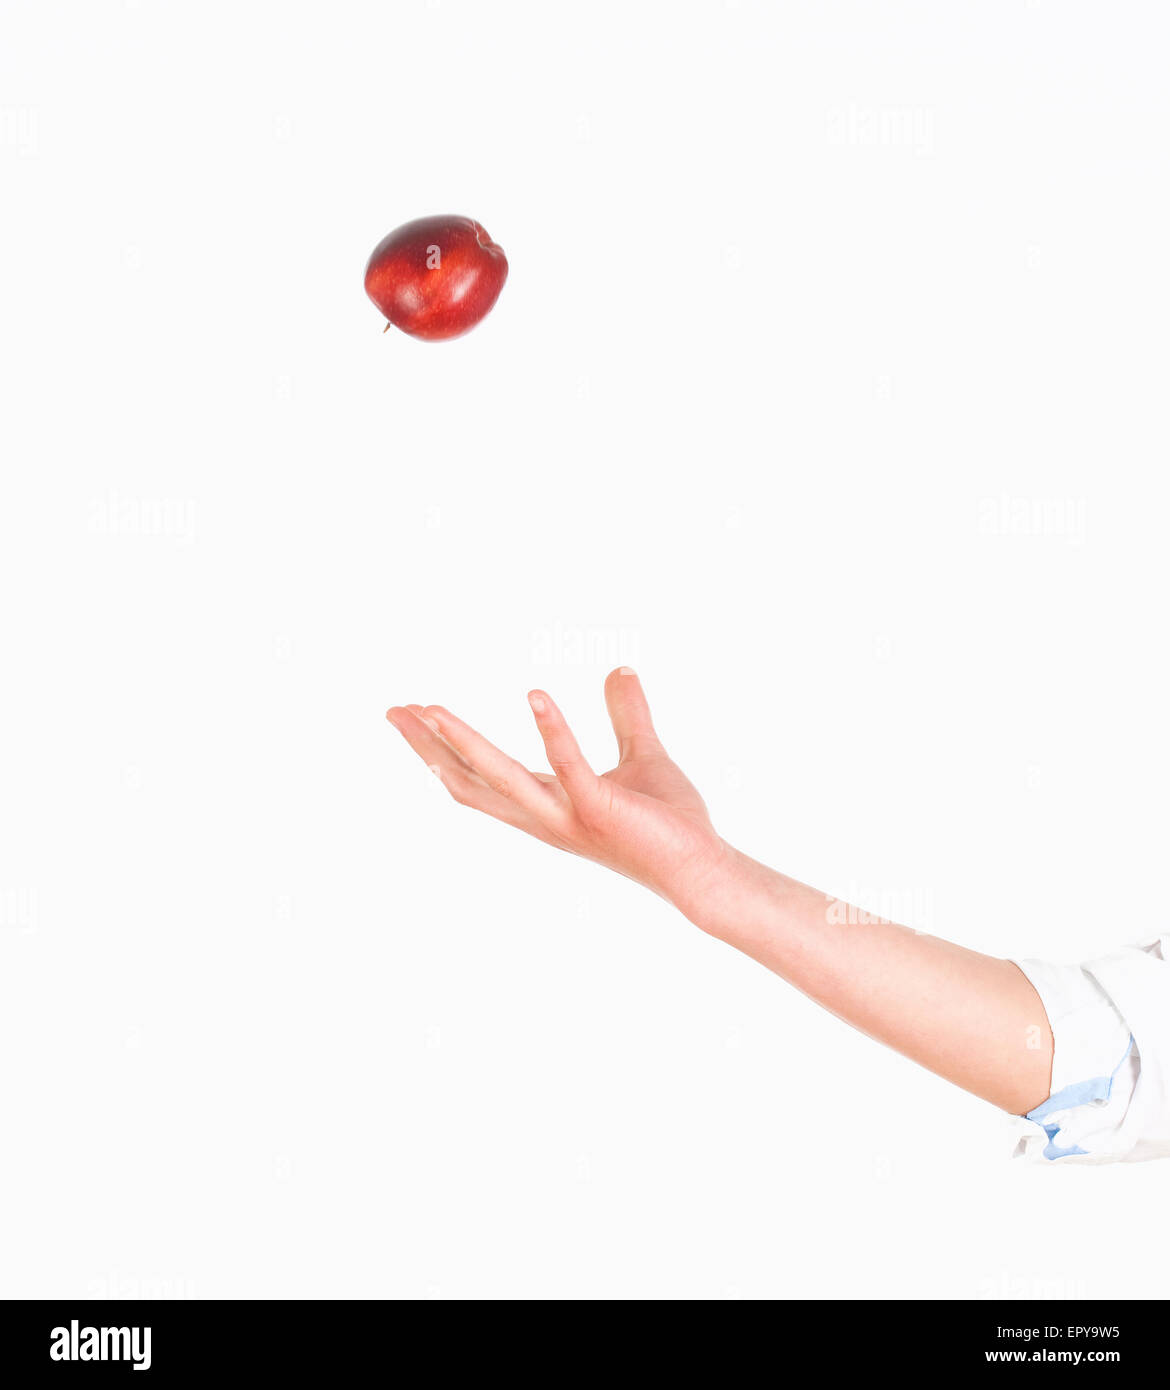 Hand Tossing Red Apple in the Air Stock Photo